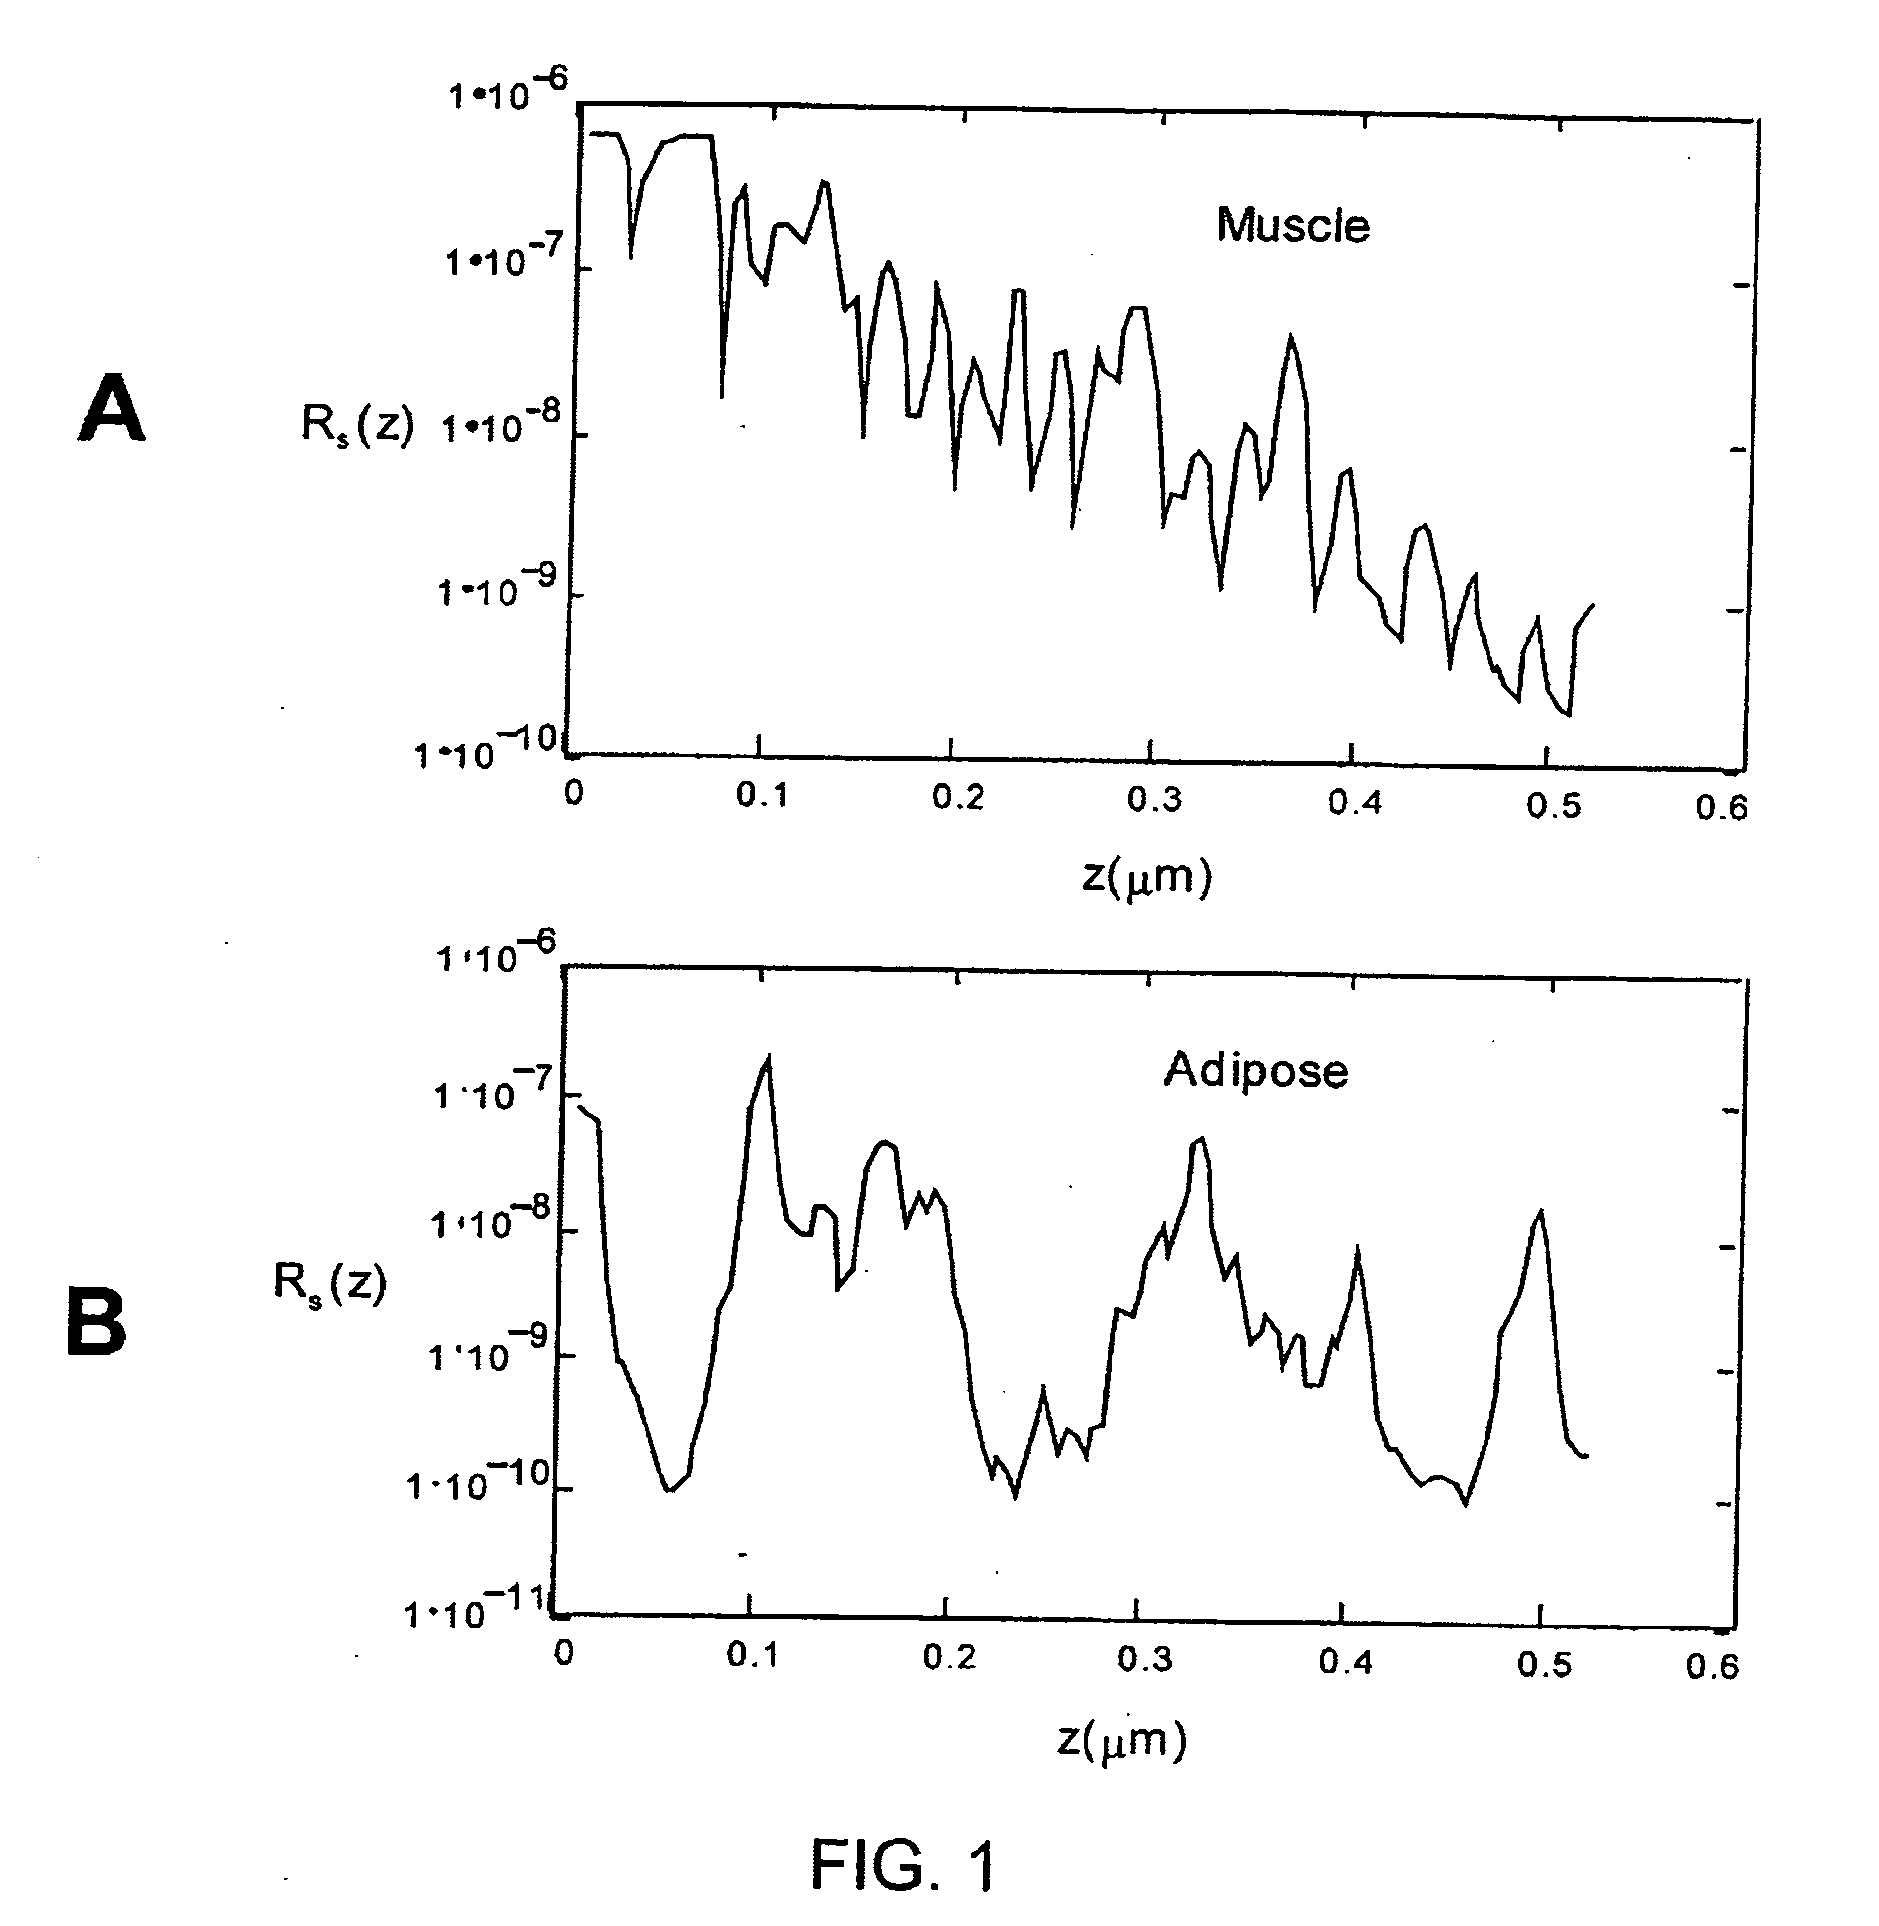 System and method for identifying tissue using low-coherence interferometry